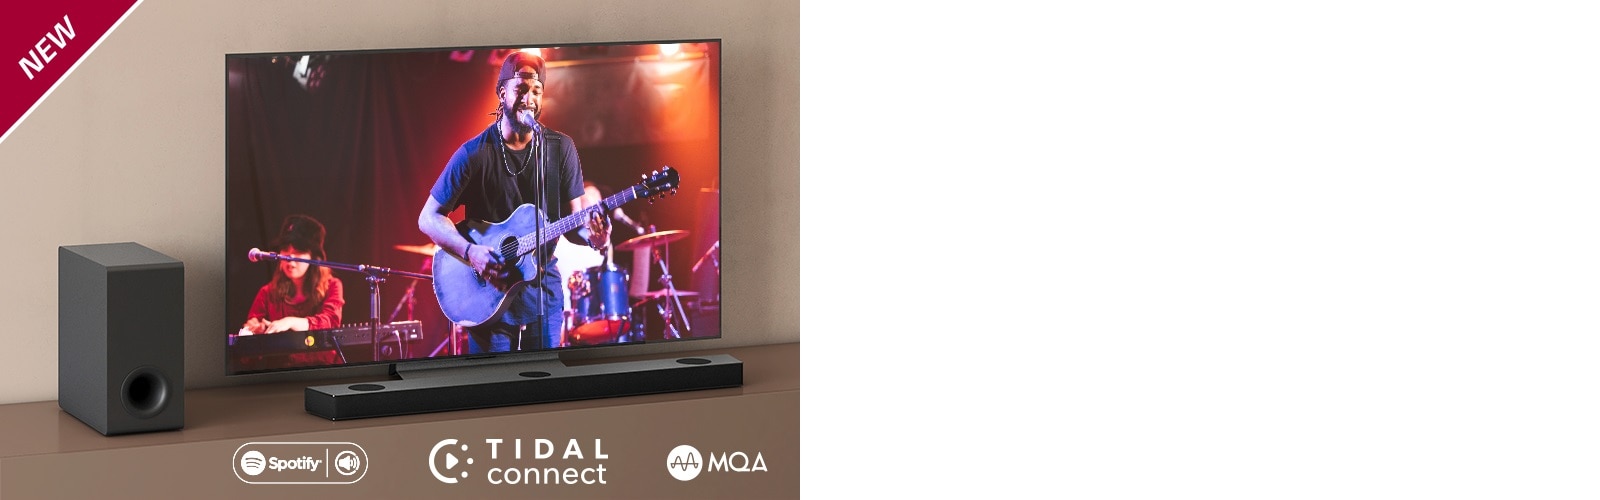 LG TV is placed on the brown shelf, LG Sound Bar S90QY is placed in front of the TV. Subwoofer is placed left side of the TV. TV shows a concerts scene. NEW mark is shown in the top left corner.